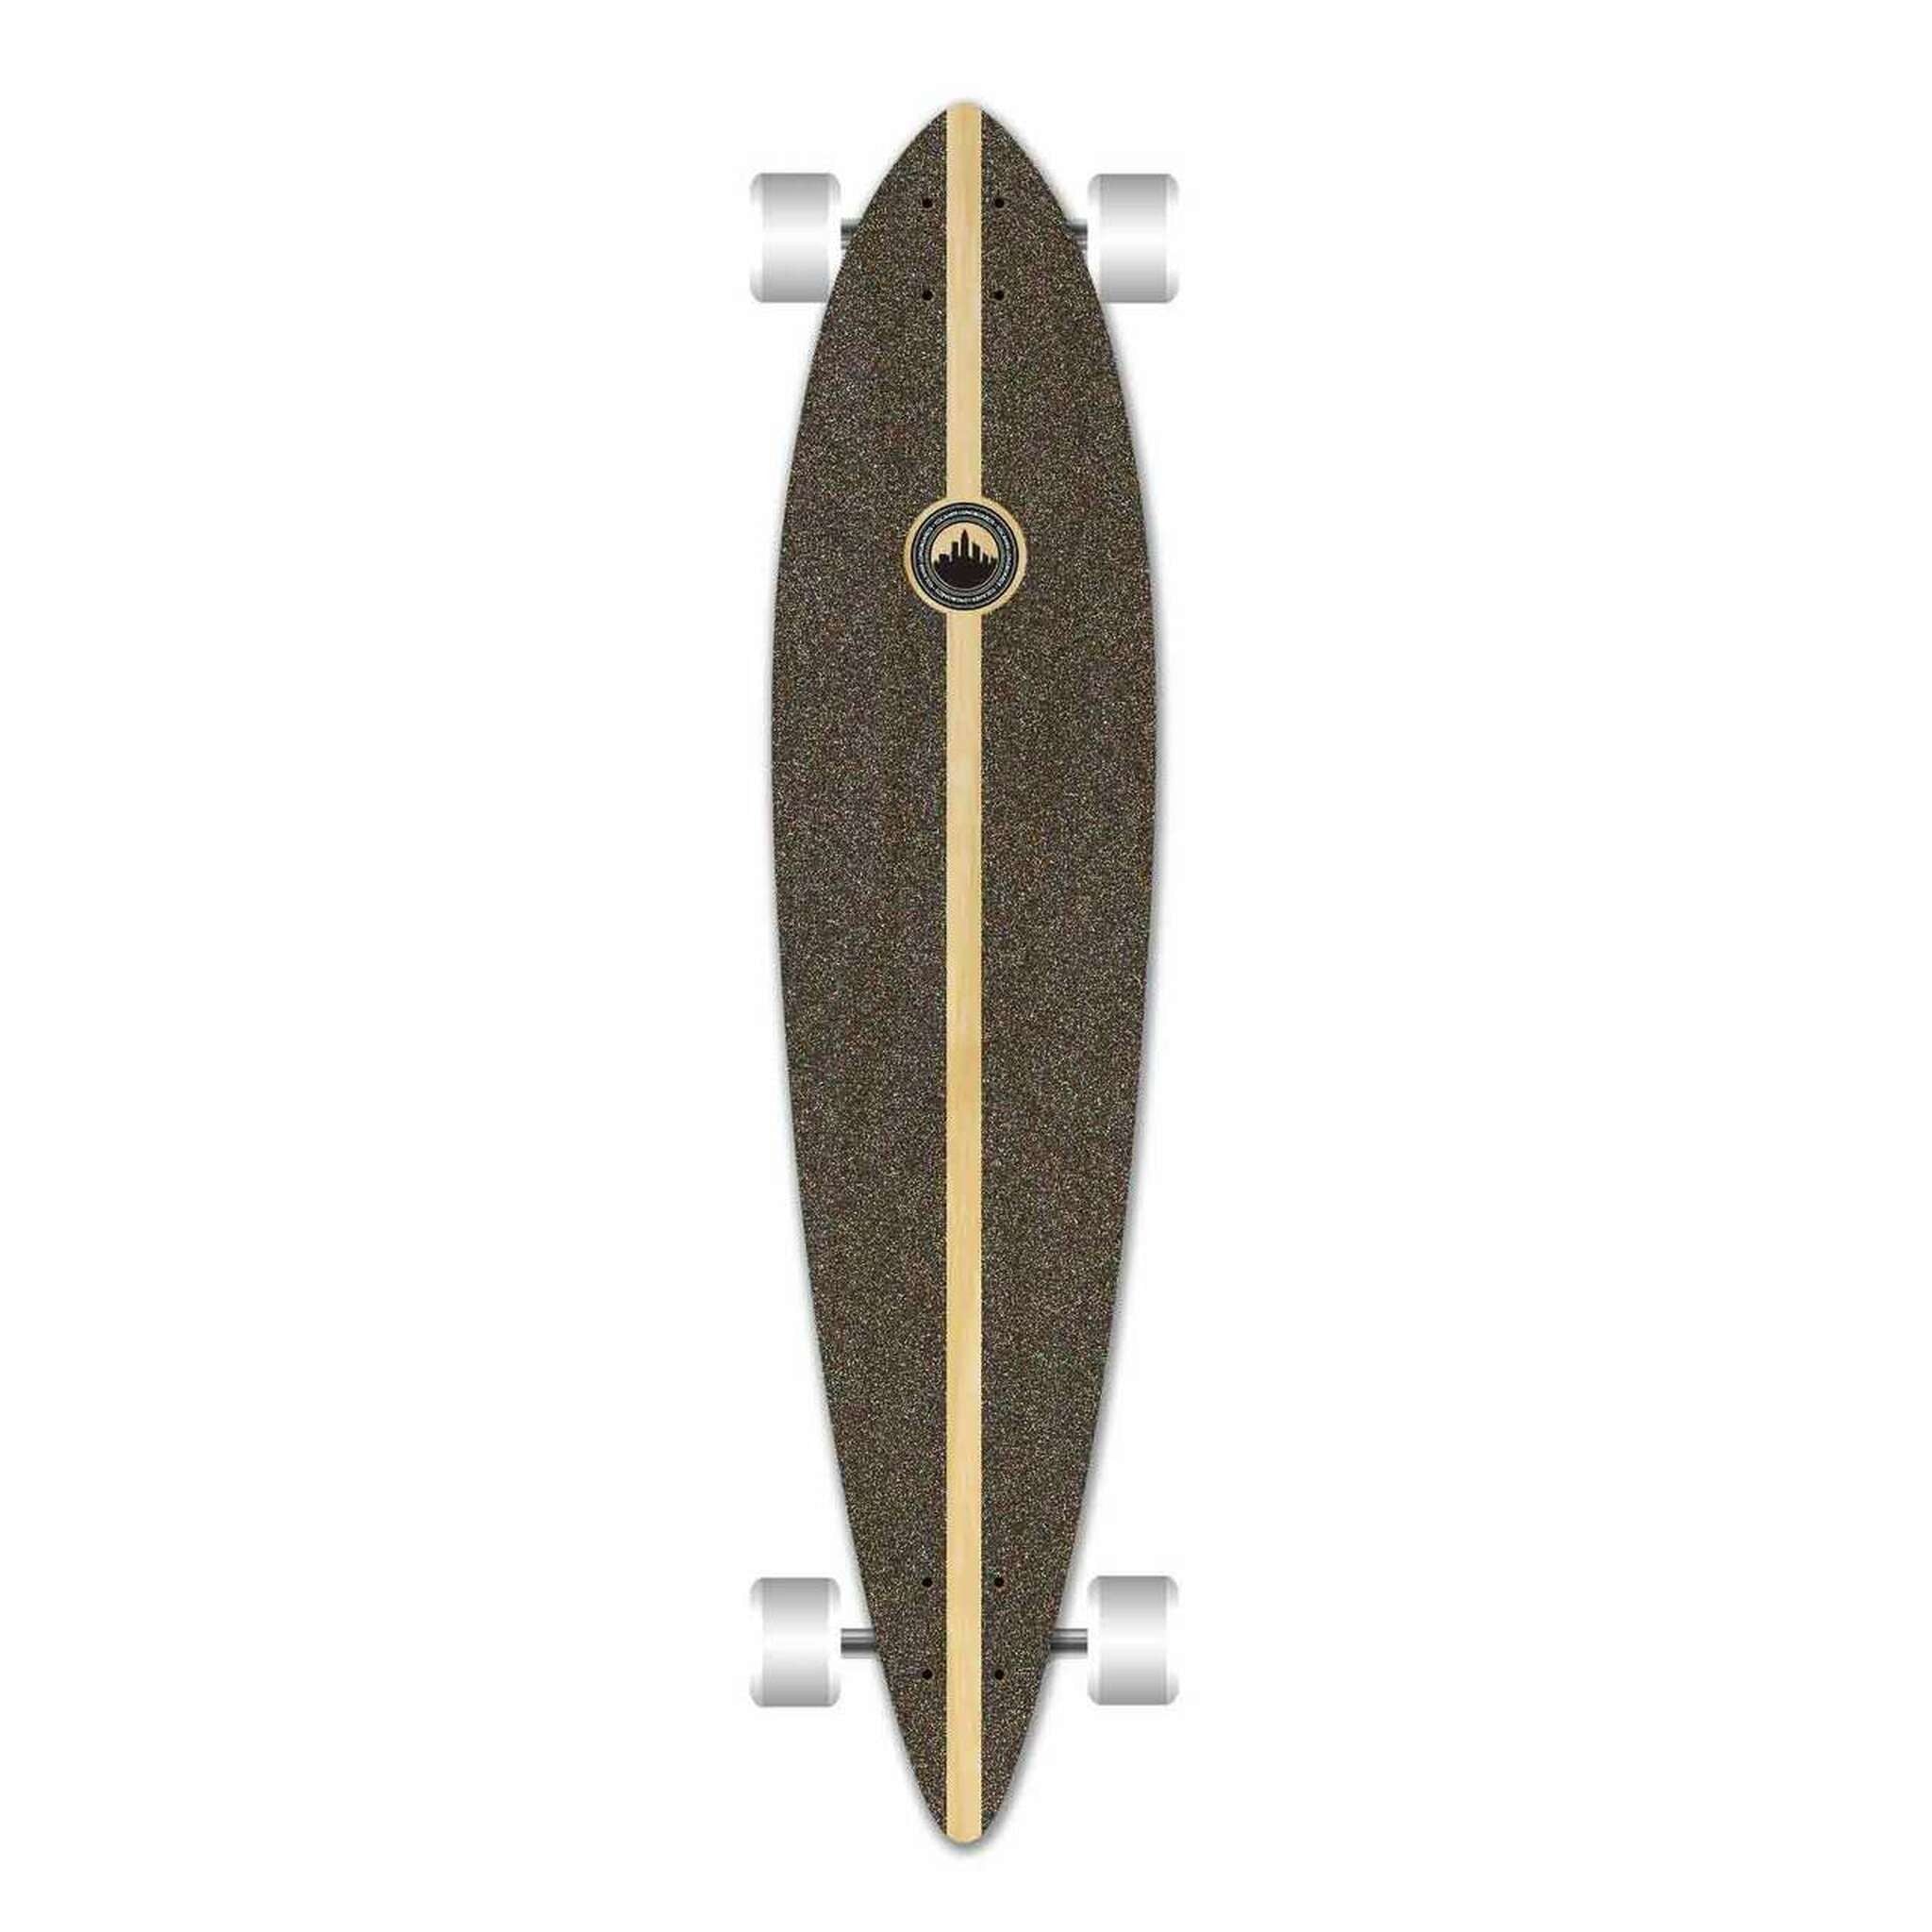 YOCAHER - Burgundy Pintail Longboard - Planche Complete